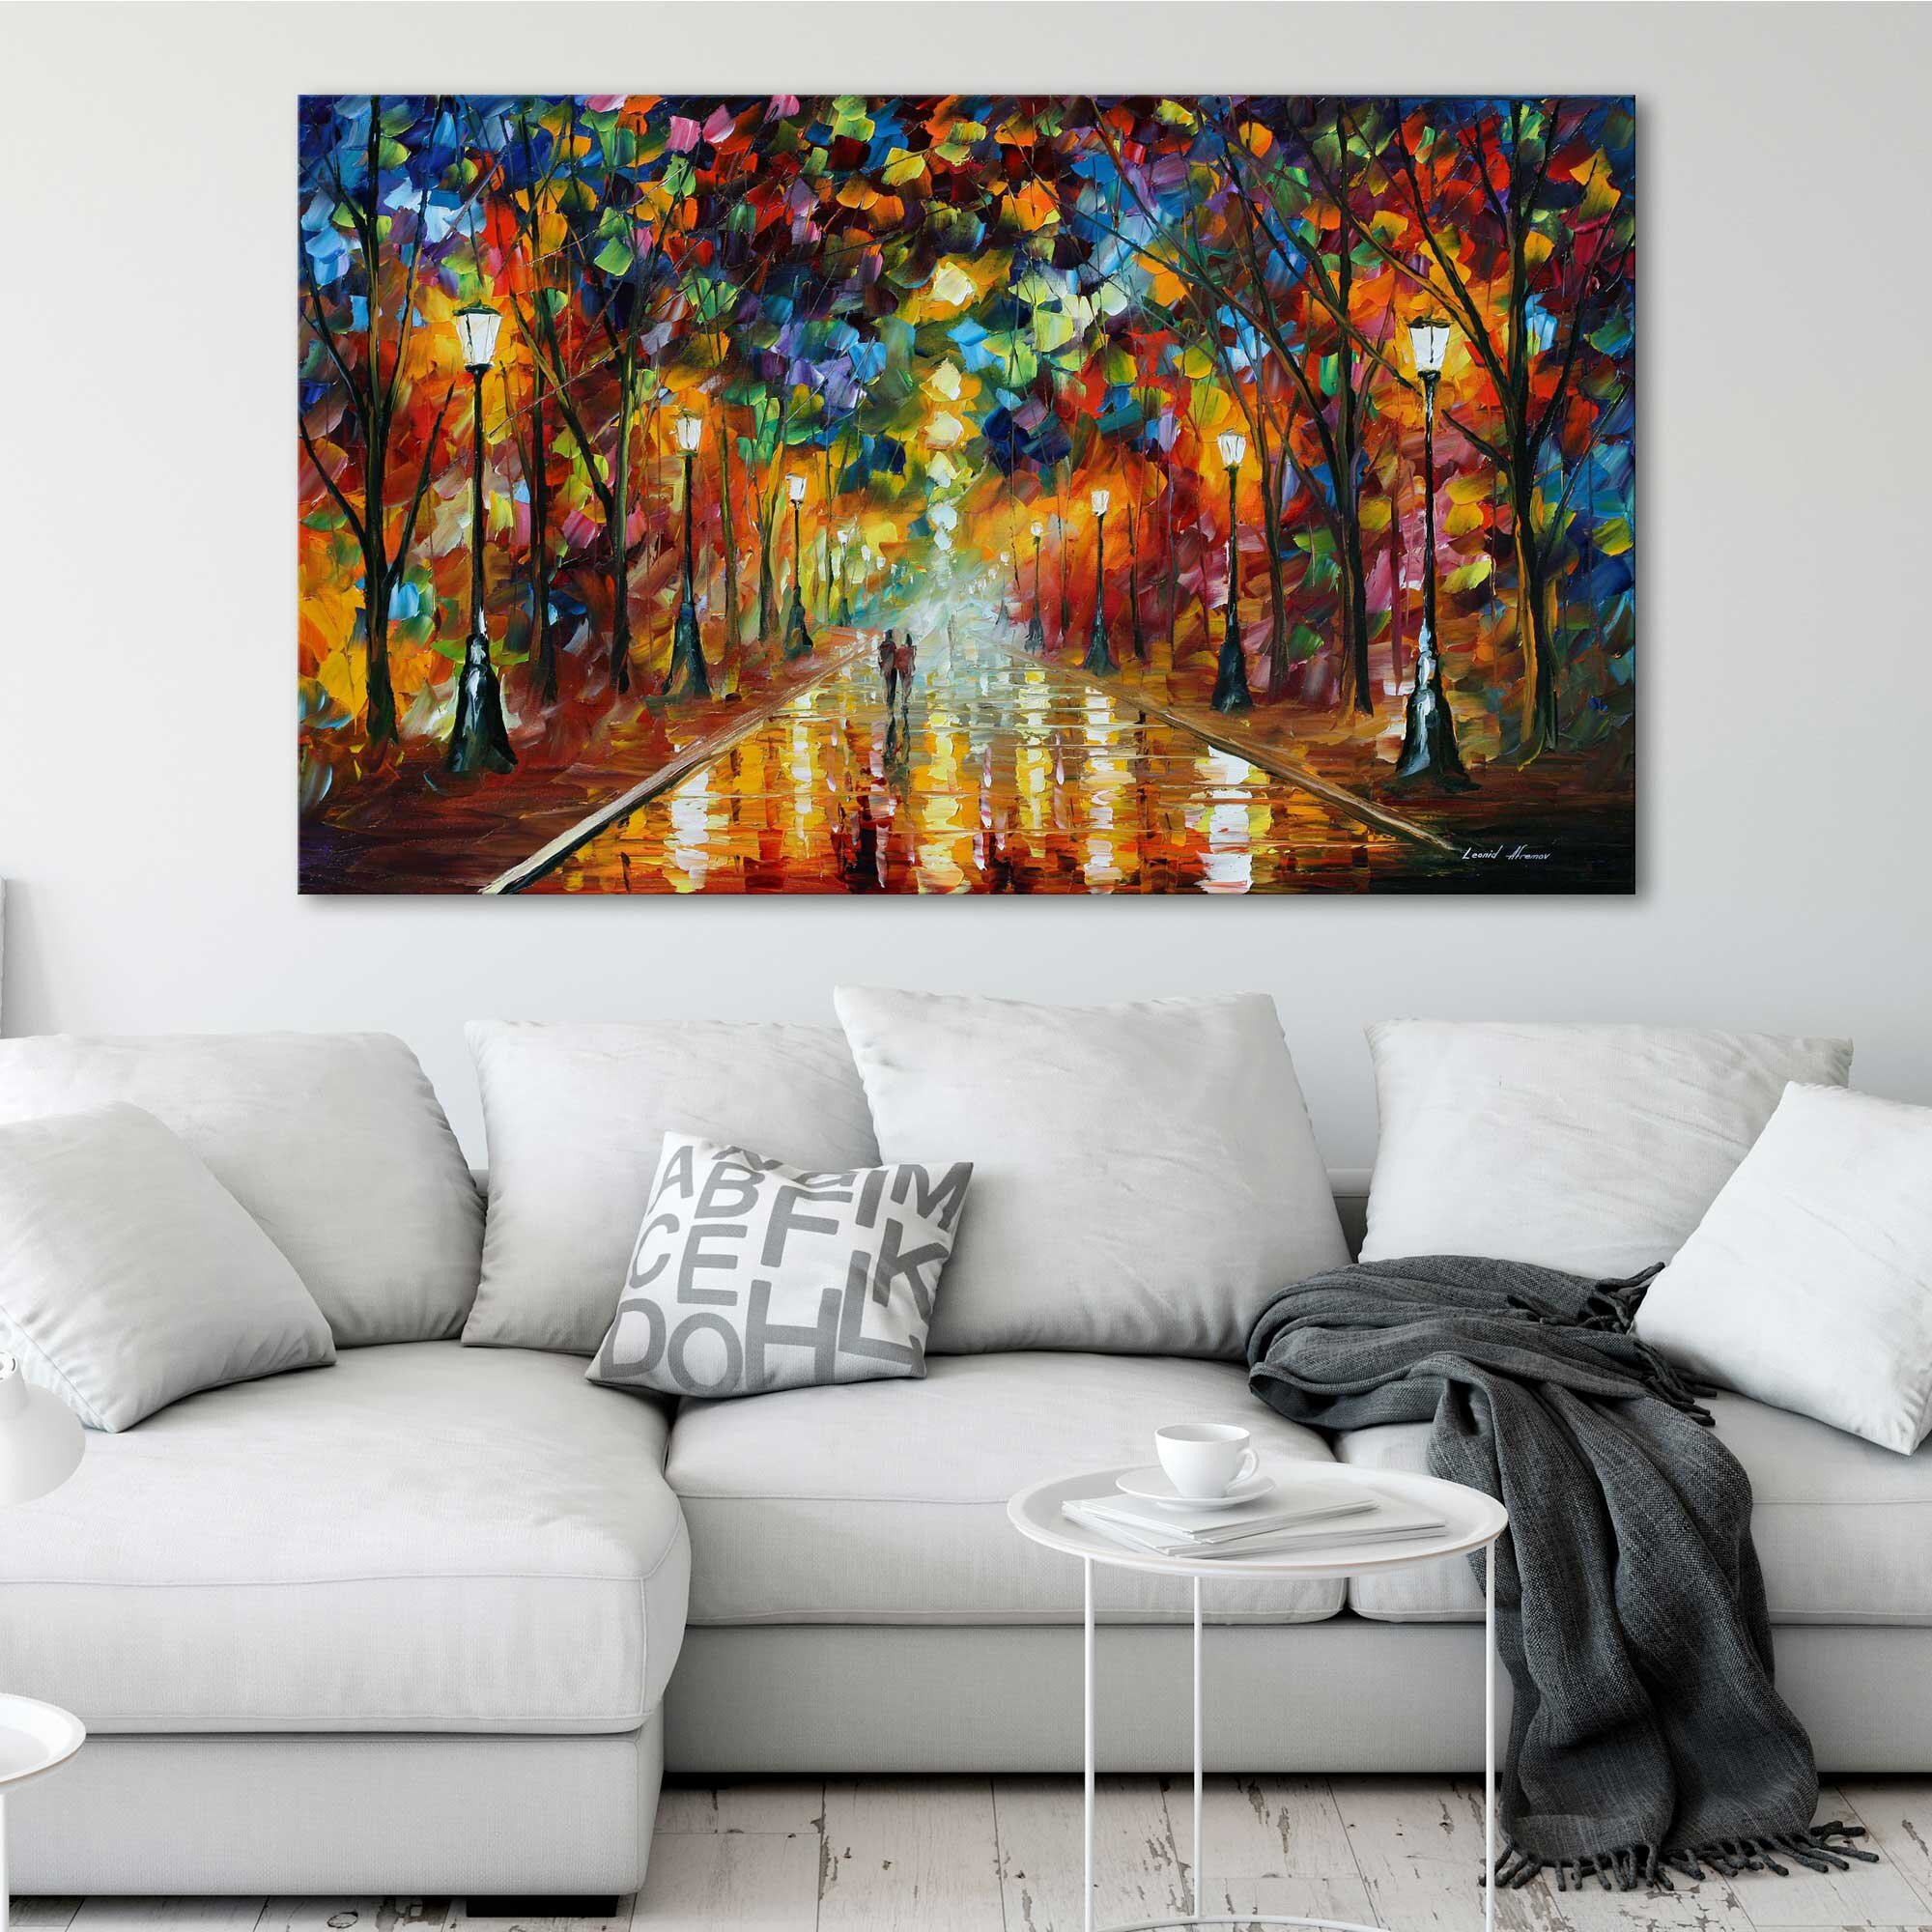 Lark Manor Farewell To Anger by Leonid Afremov - Wrapped Canvas Print ...